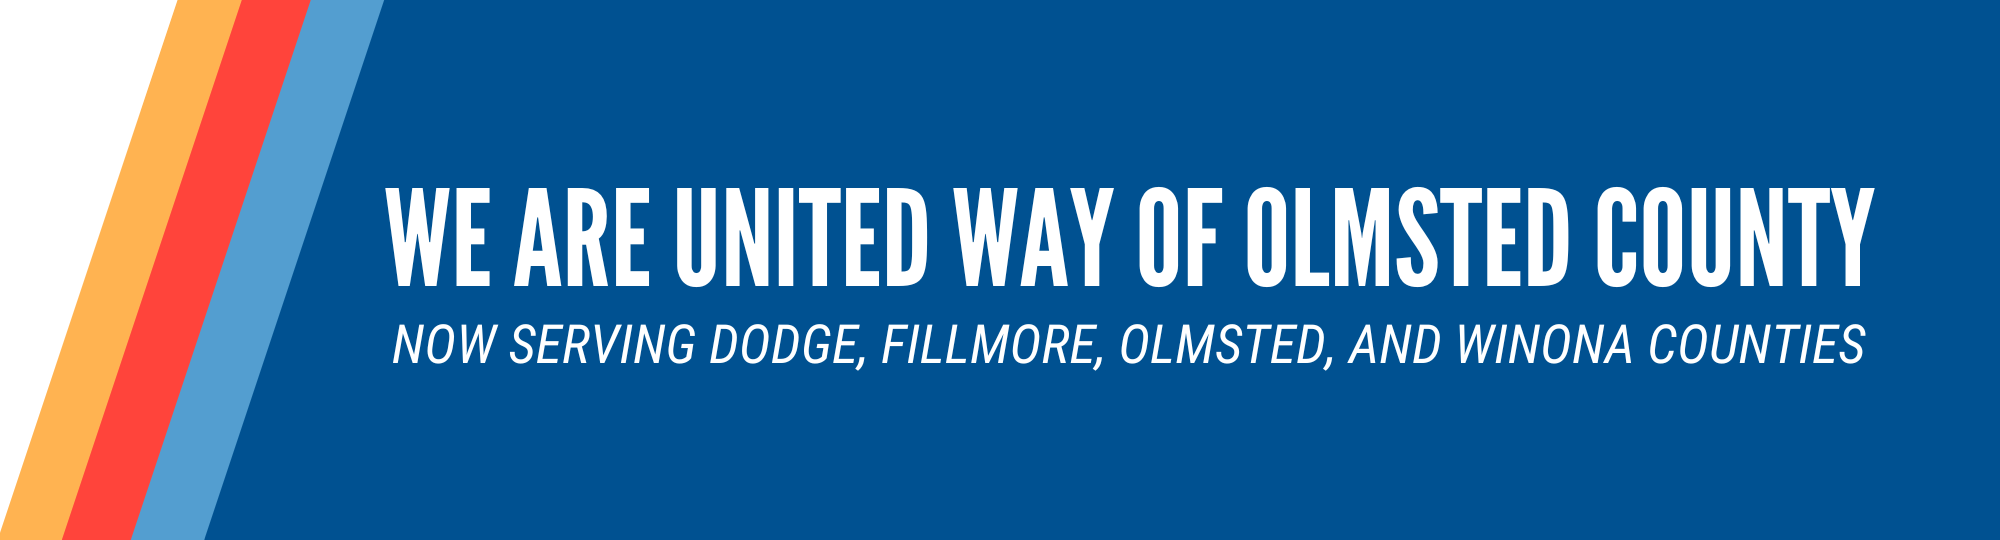 Website banner: We are United Way of Olmsted County, now serving Dodge, Fillmore, Olmsted, and Winona Counties.